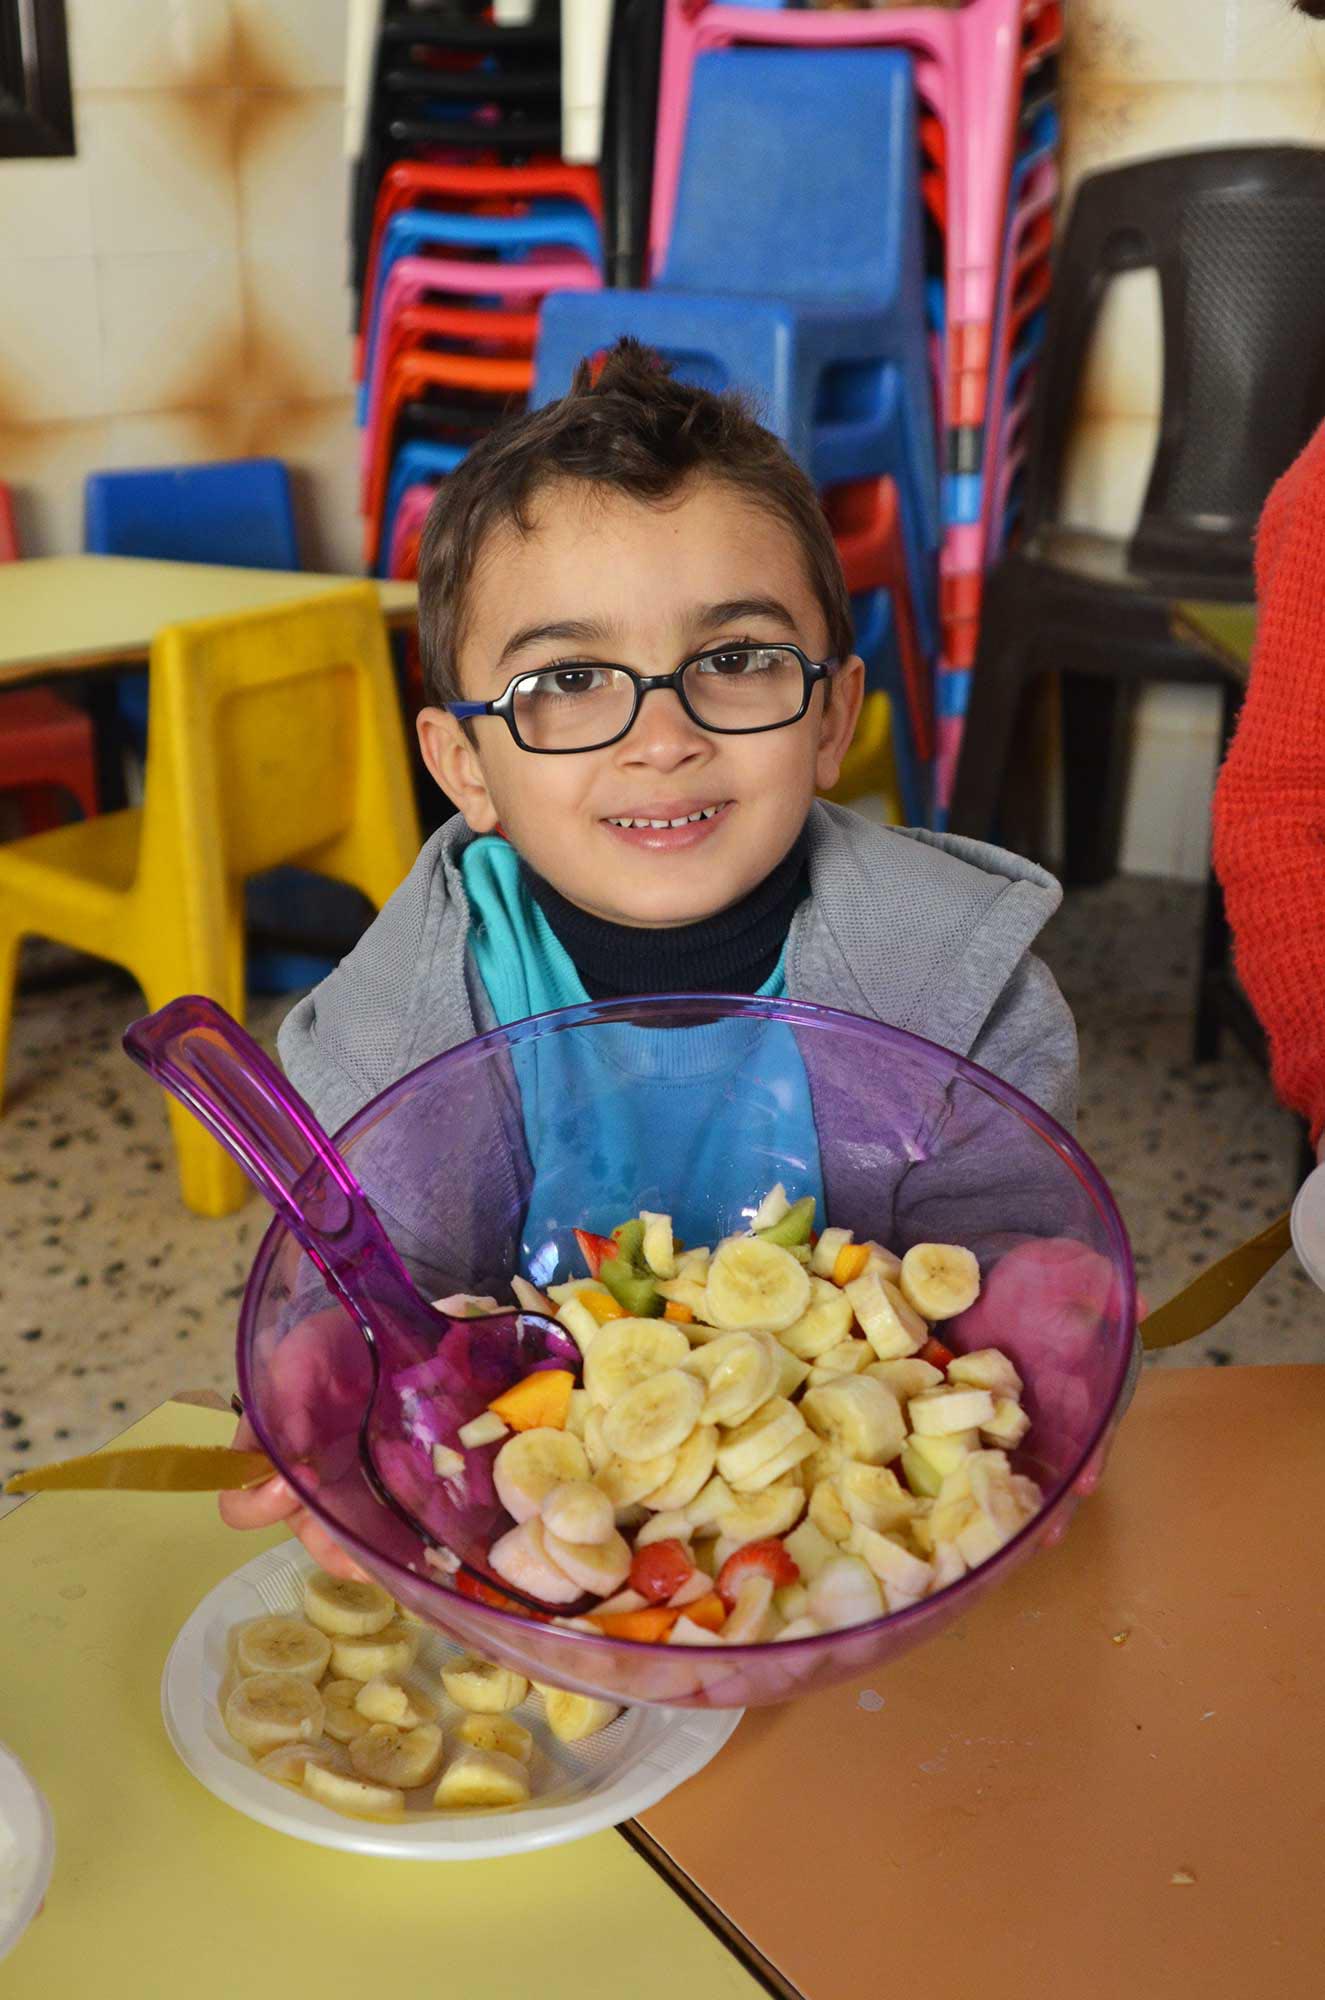 Gaza preschools embrace active learning in the kitchen